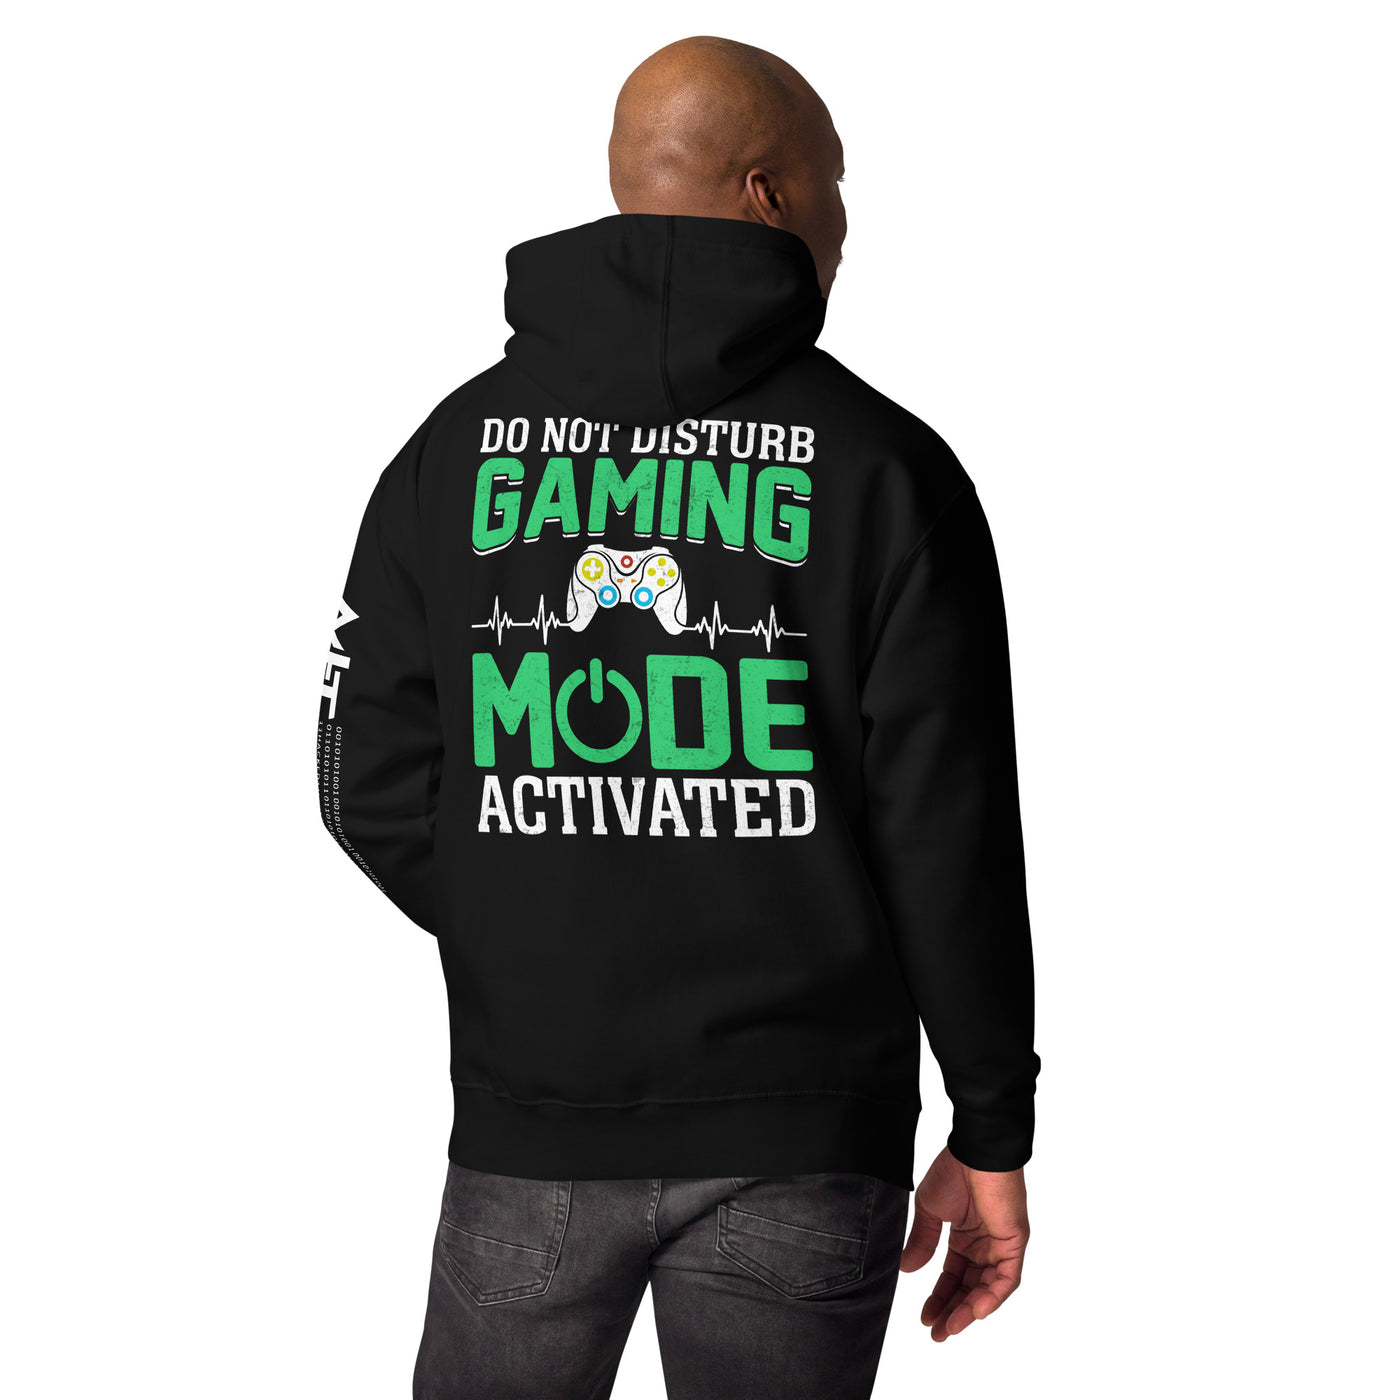 Do not Disturb, Gaming Mode On - Unisex Hoodie  ( Back Print )